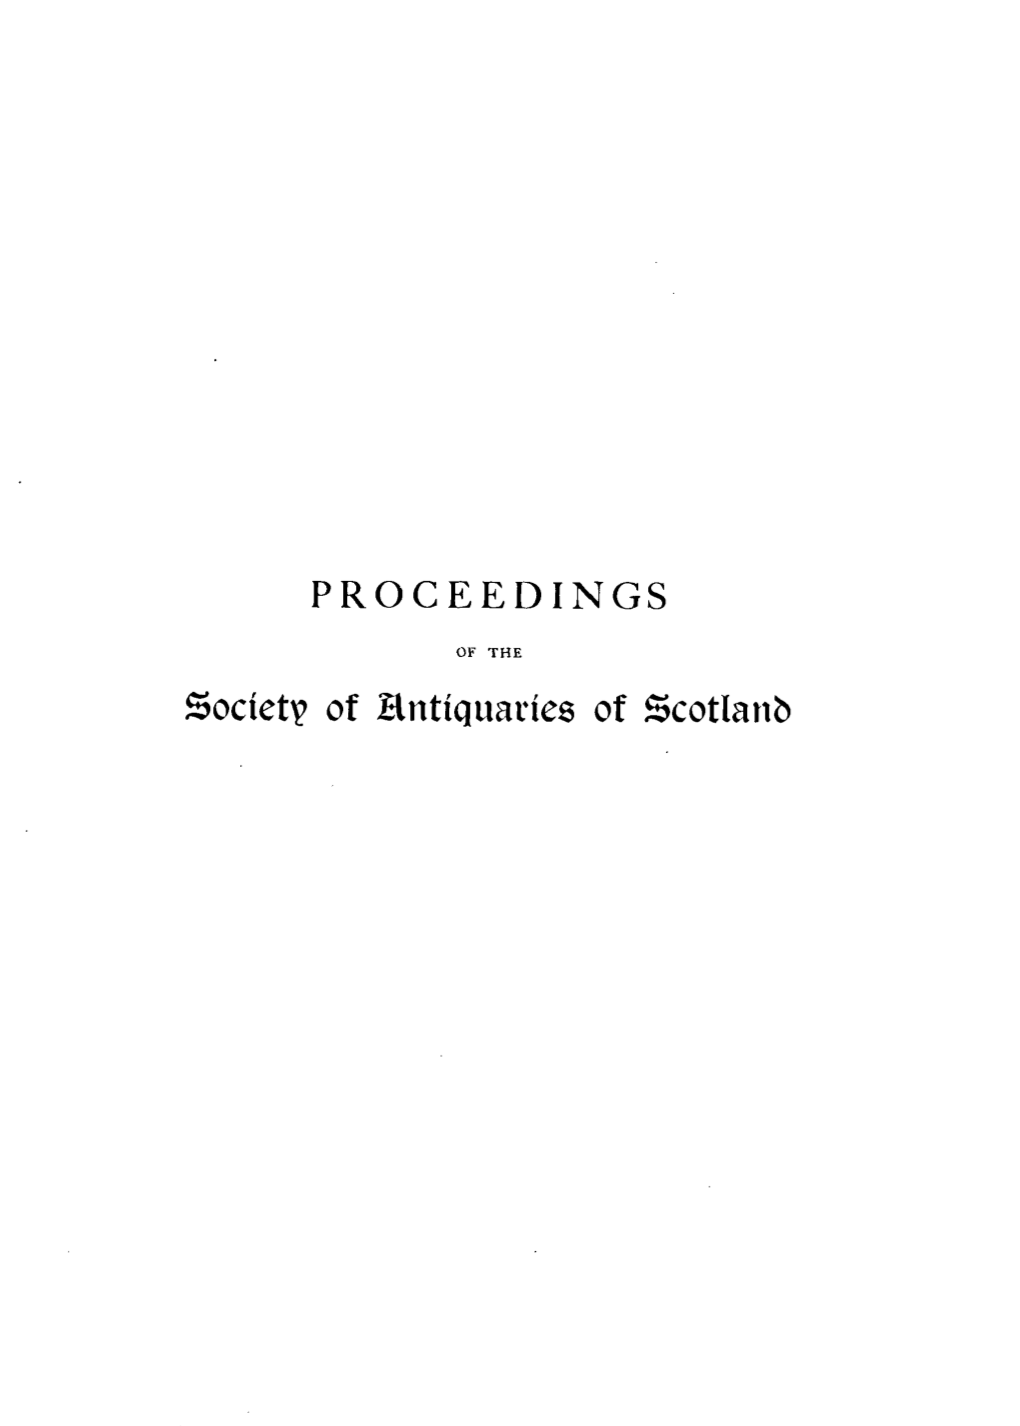 Society of Hntiquaries of Scotland PROCEEDINGS